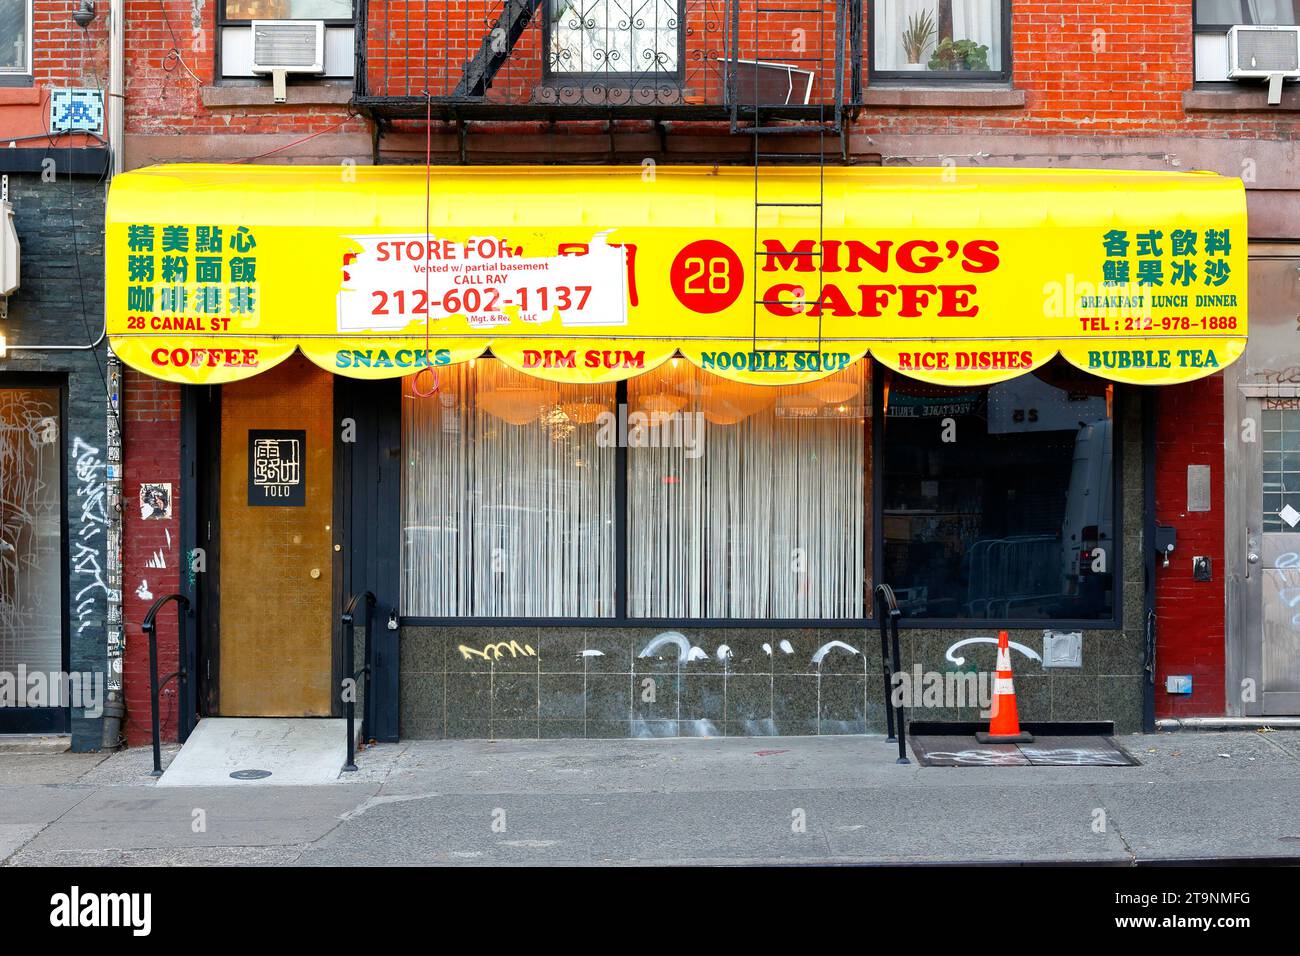 Tolo, 28 Canal St, New York, NYC storefront photo of a Chinese American restaurant and wine bar in Manhattan's Lower East Side. Stock Photo